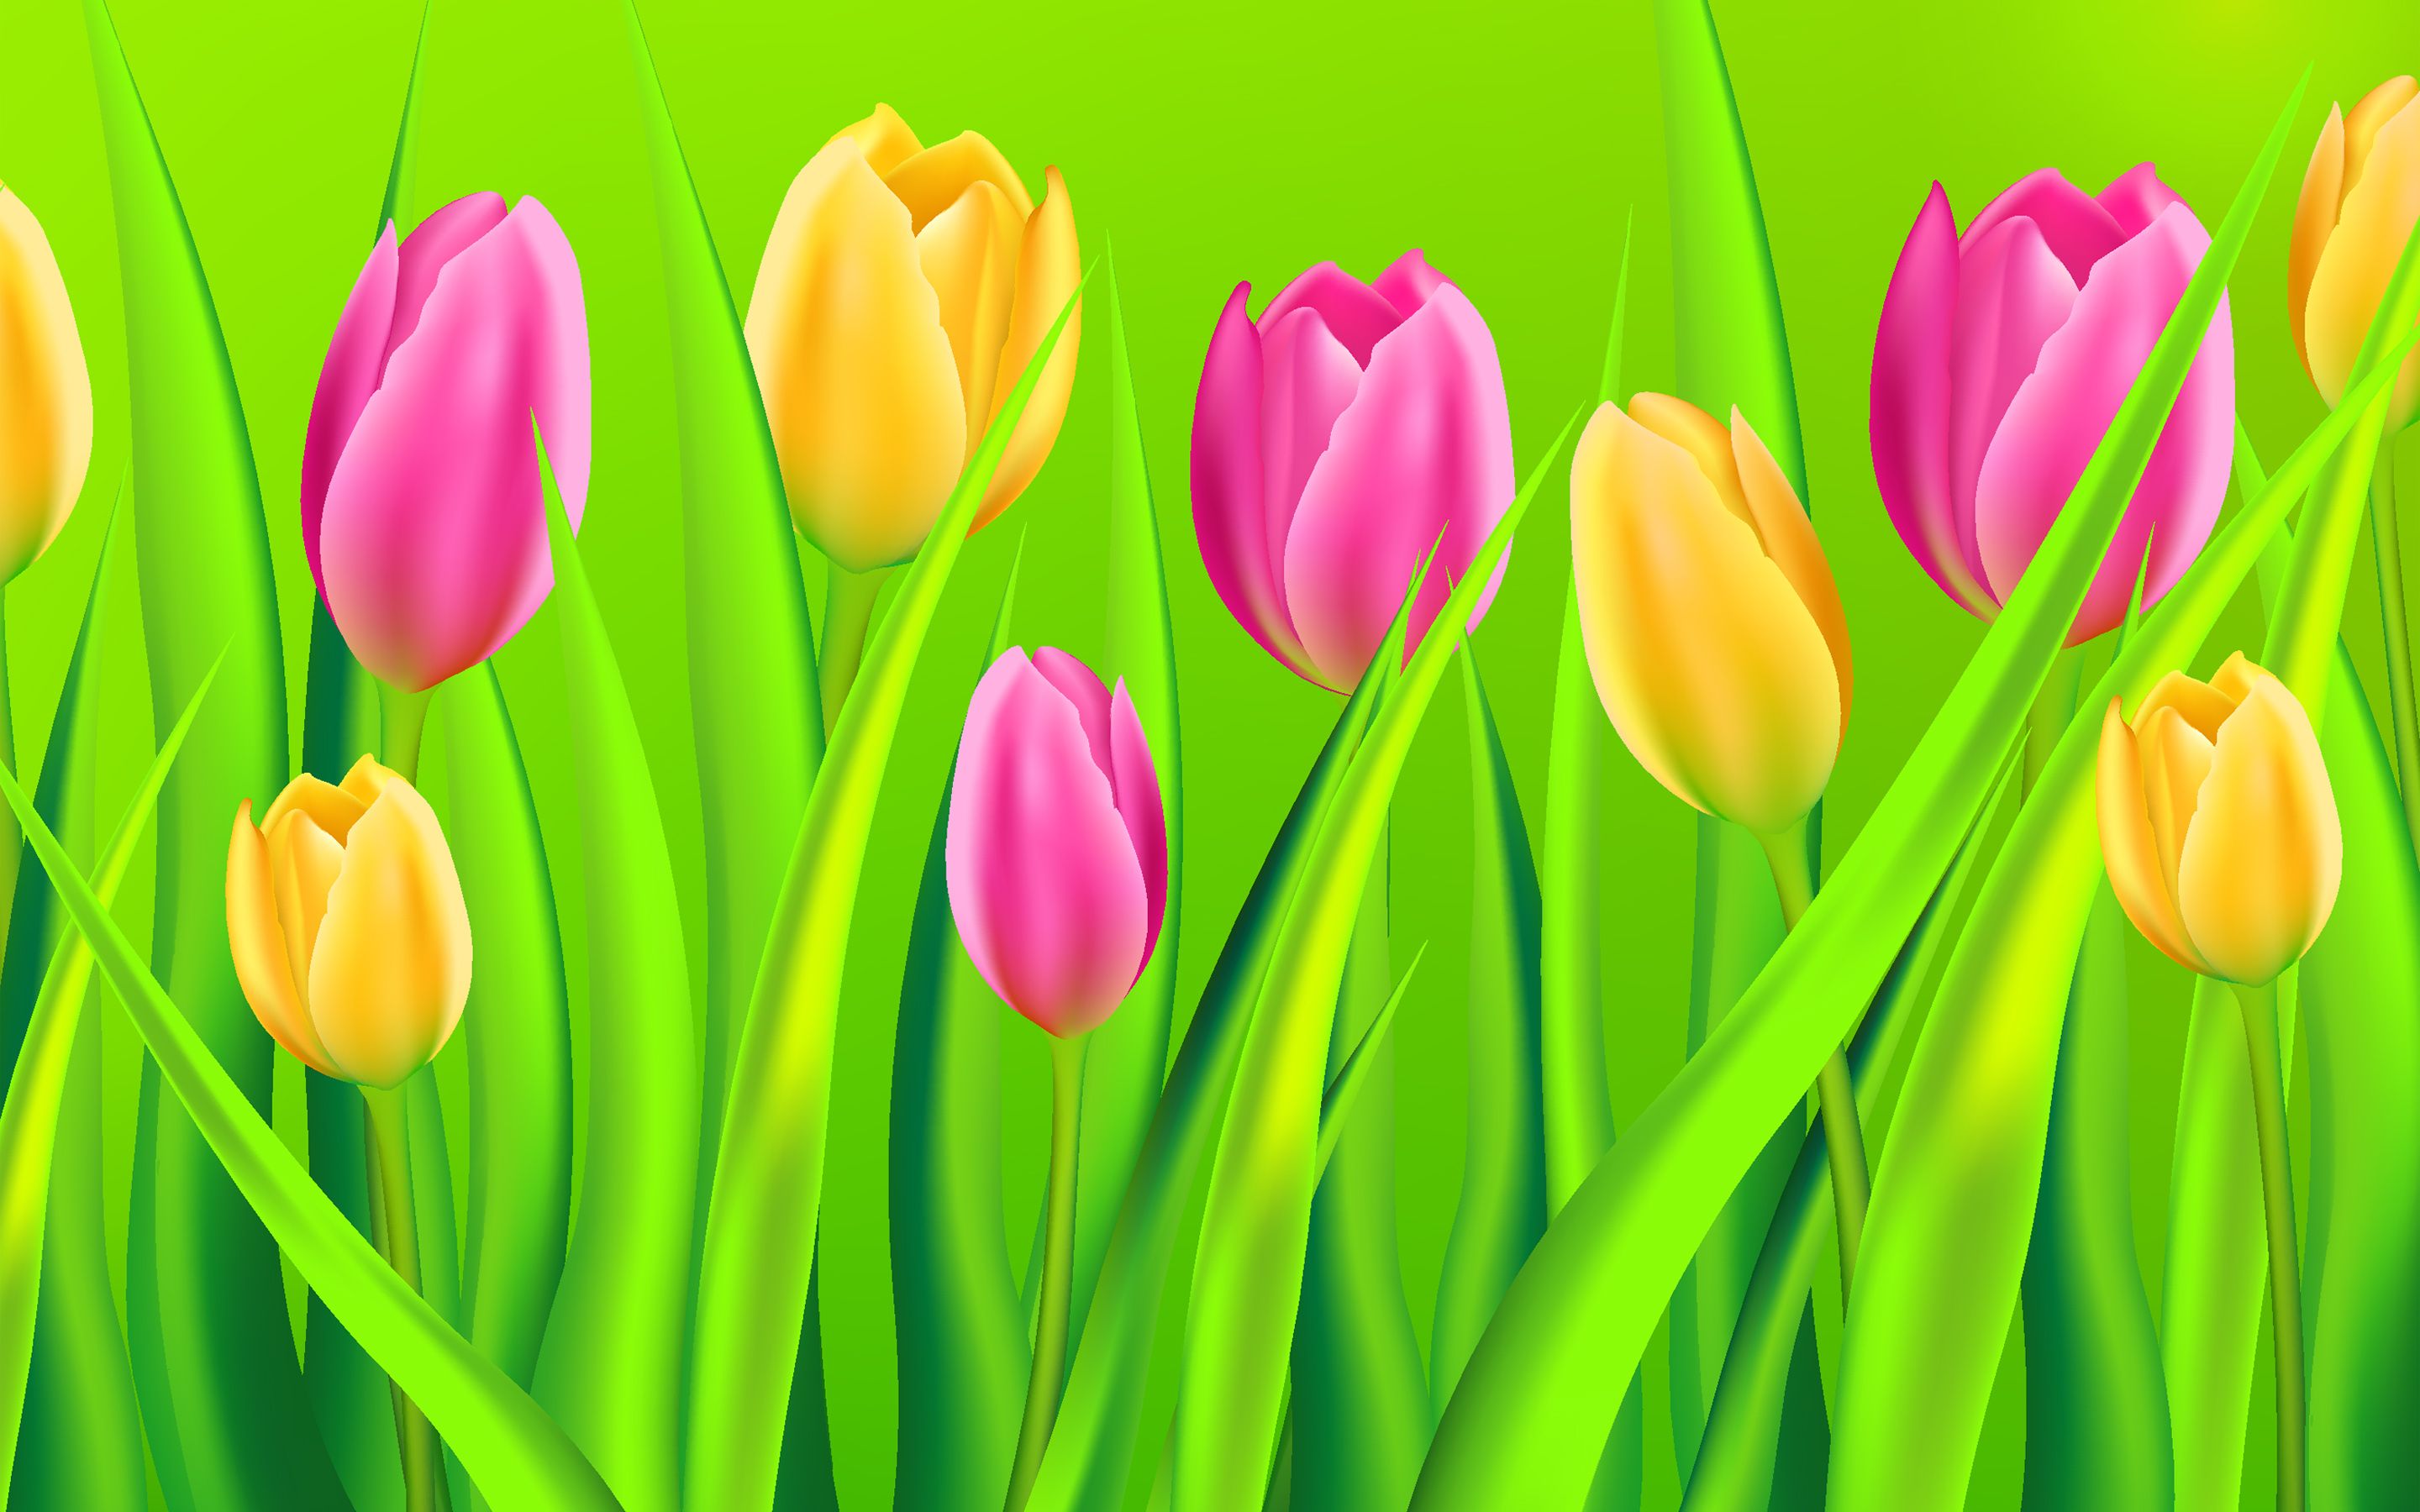 Download wallpaper purple tulips, yellow tulips, spring flowers, background with tulips, cartoon tulips, beautiful flowers, tulips for desktop with resolution 2880x1800. High Quality HD picture wallpaper